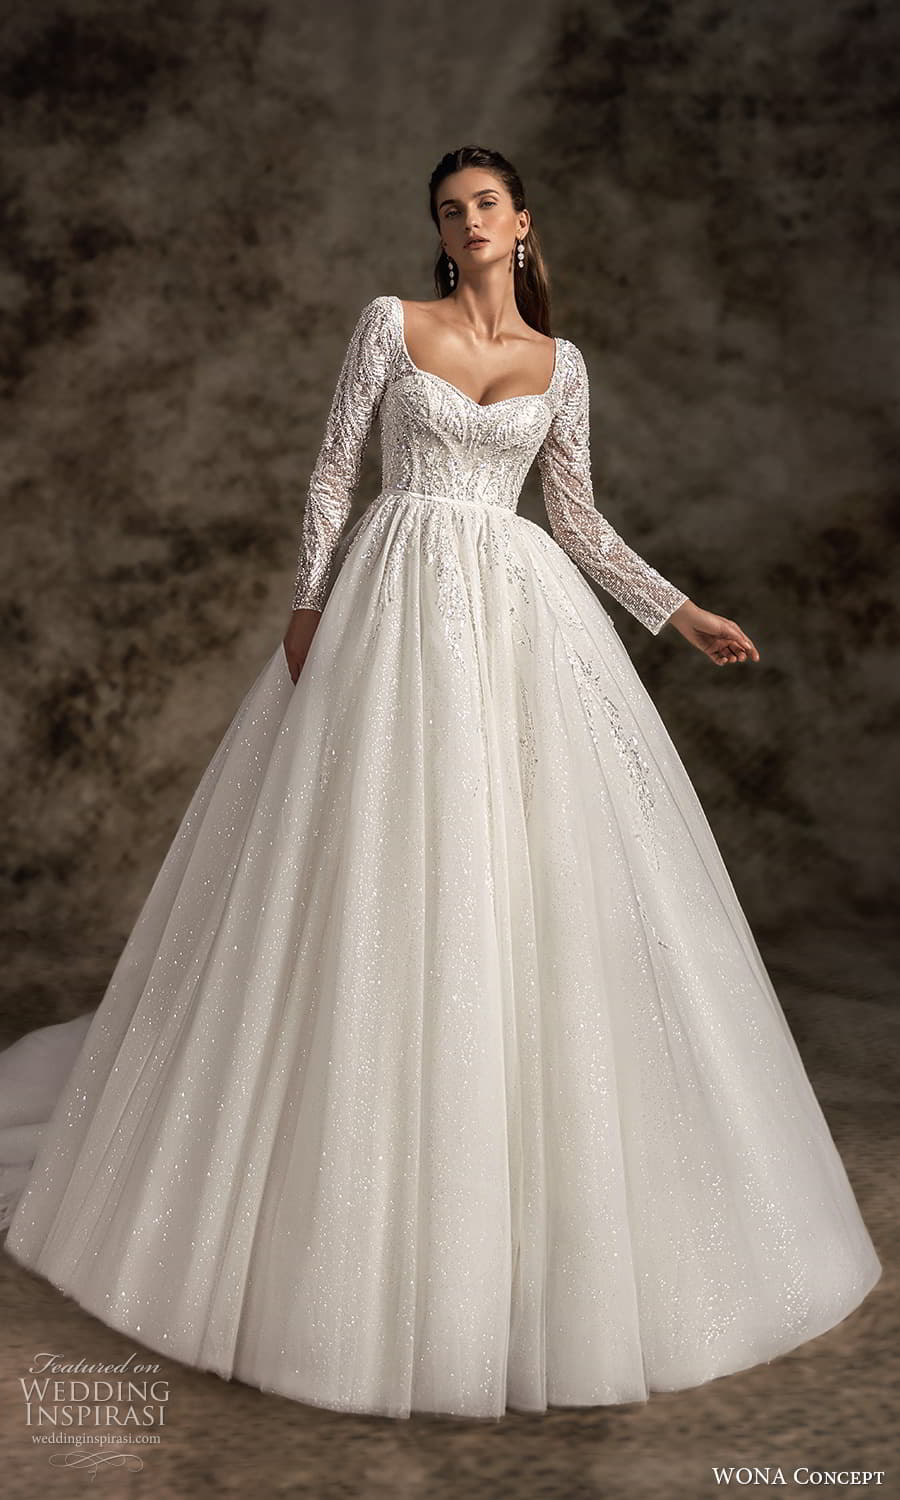 wona concept 2023 bridal long sleeve sweetheart square queen anne neckline heavily embellished bodice a line ball gown wedding dress chapel train (6) mv